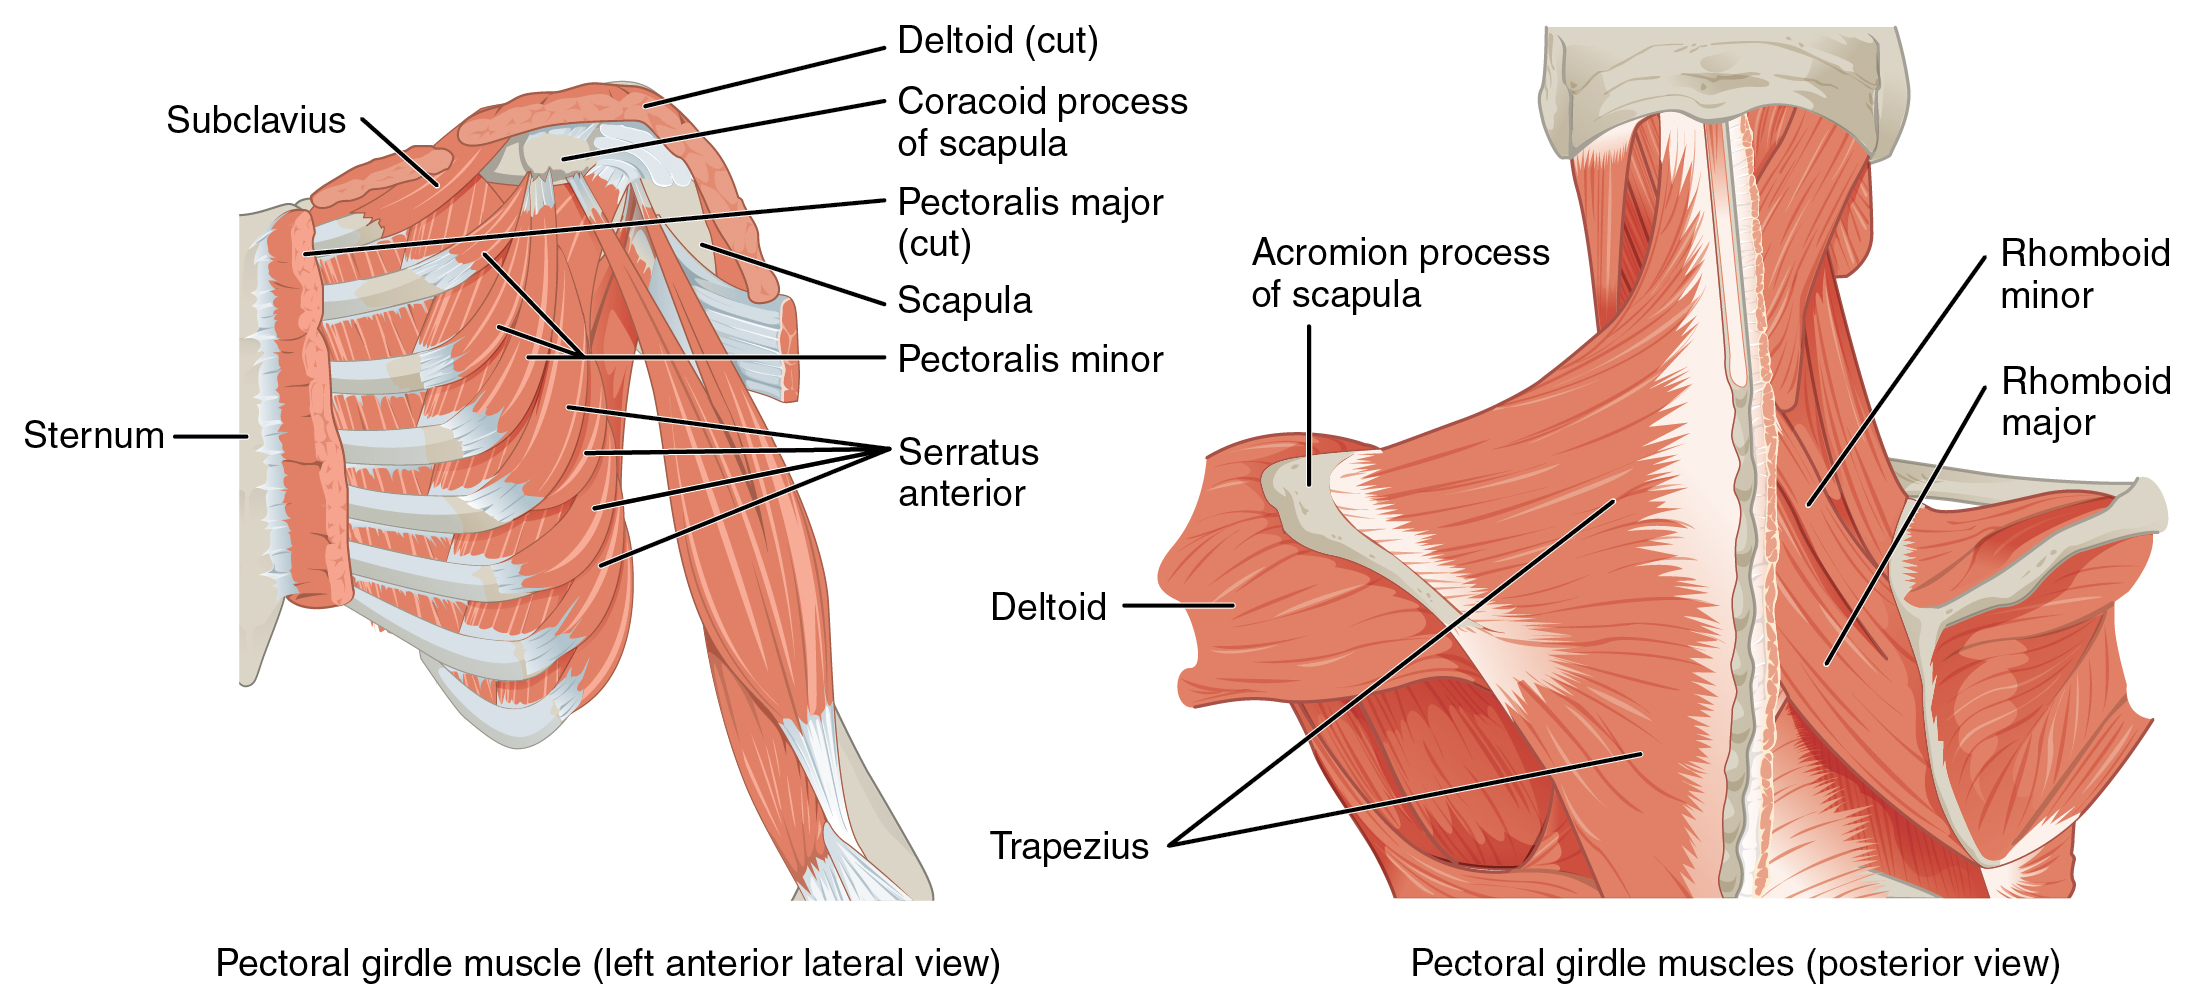 The left panel shows the anterior lateral view of the pectoral girdle muscle, and the right panel shows the posterior view of the pectoral girdle muscle.